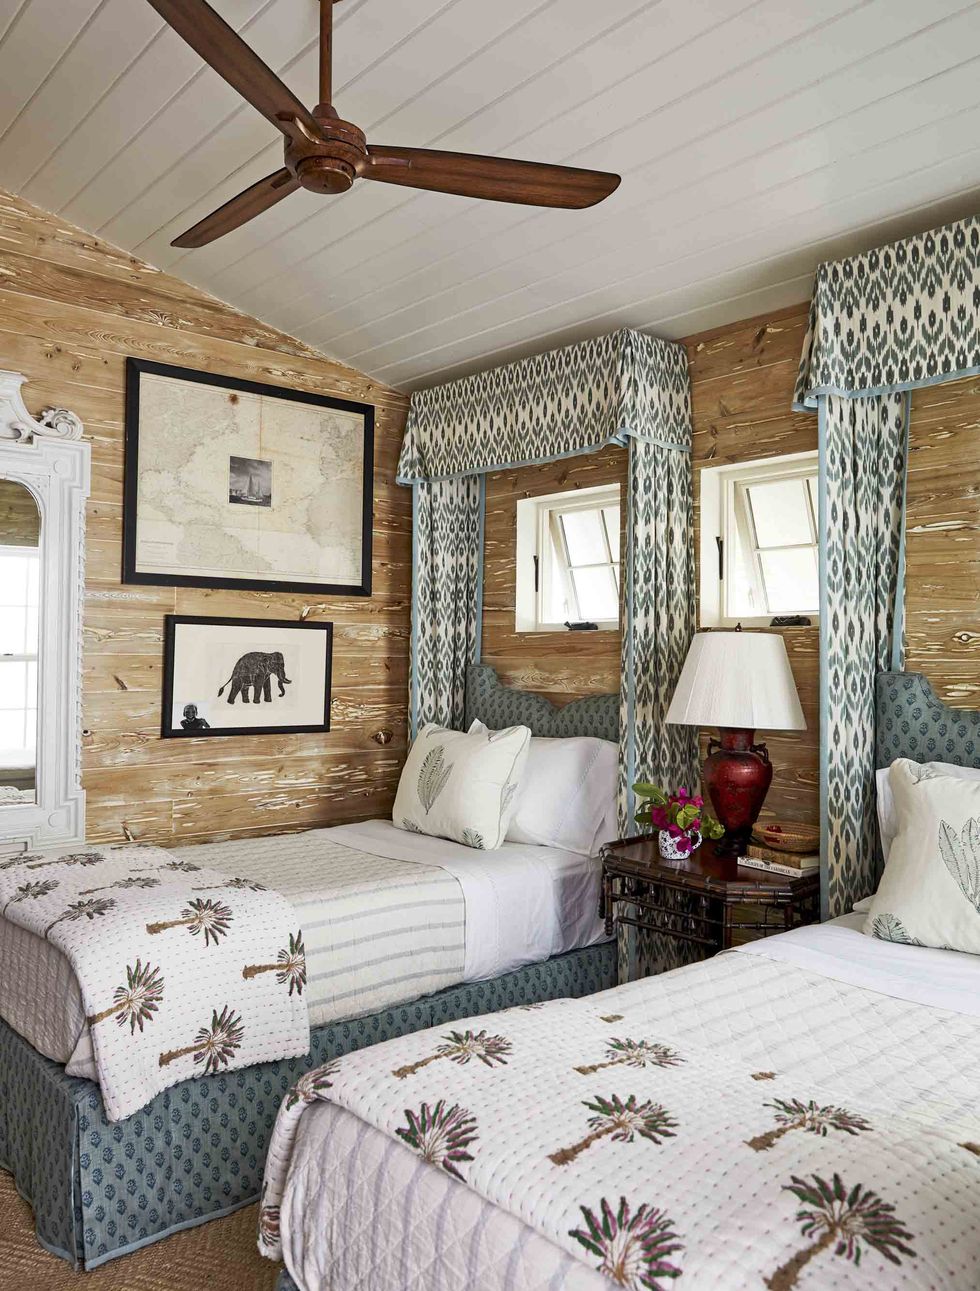 limed pecky cypress paneling envelops the walls in the guest cottage with two twin beds